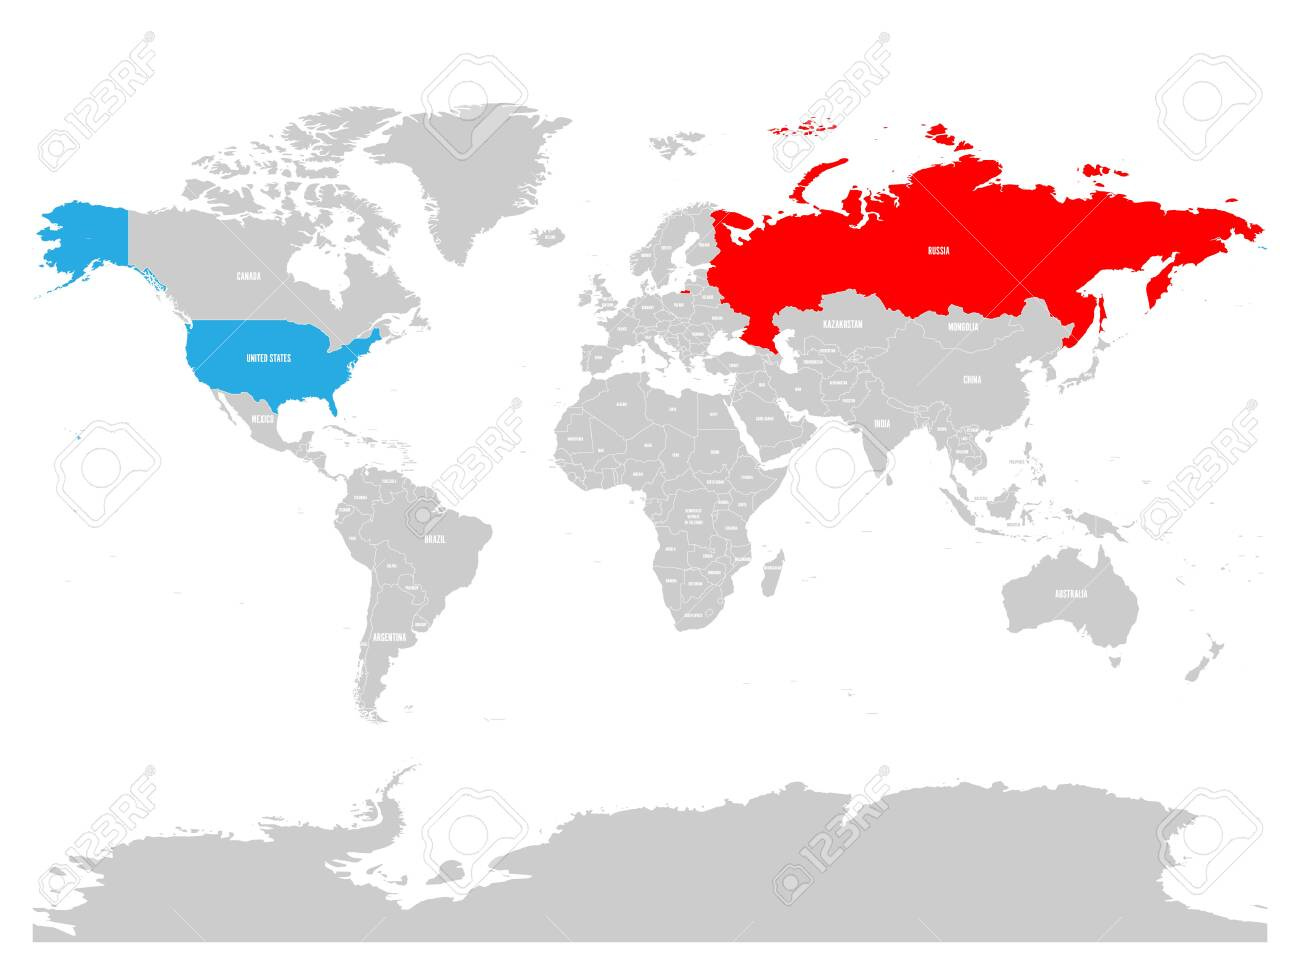 United States And Russia Highlighted On Political Map Of World. Vector  Illustration. Stock Photo, Picture And Royalty Free Image. Image 136901616.